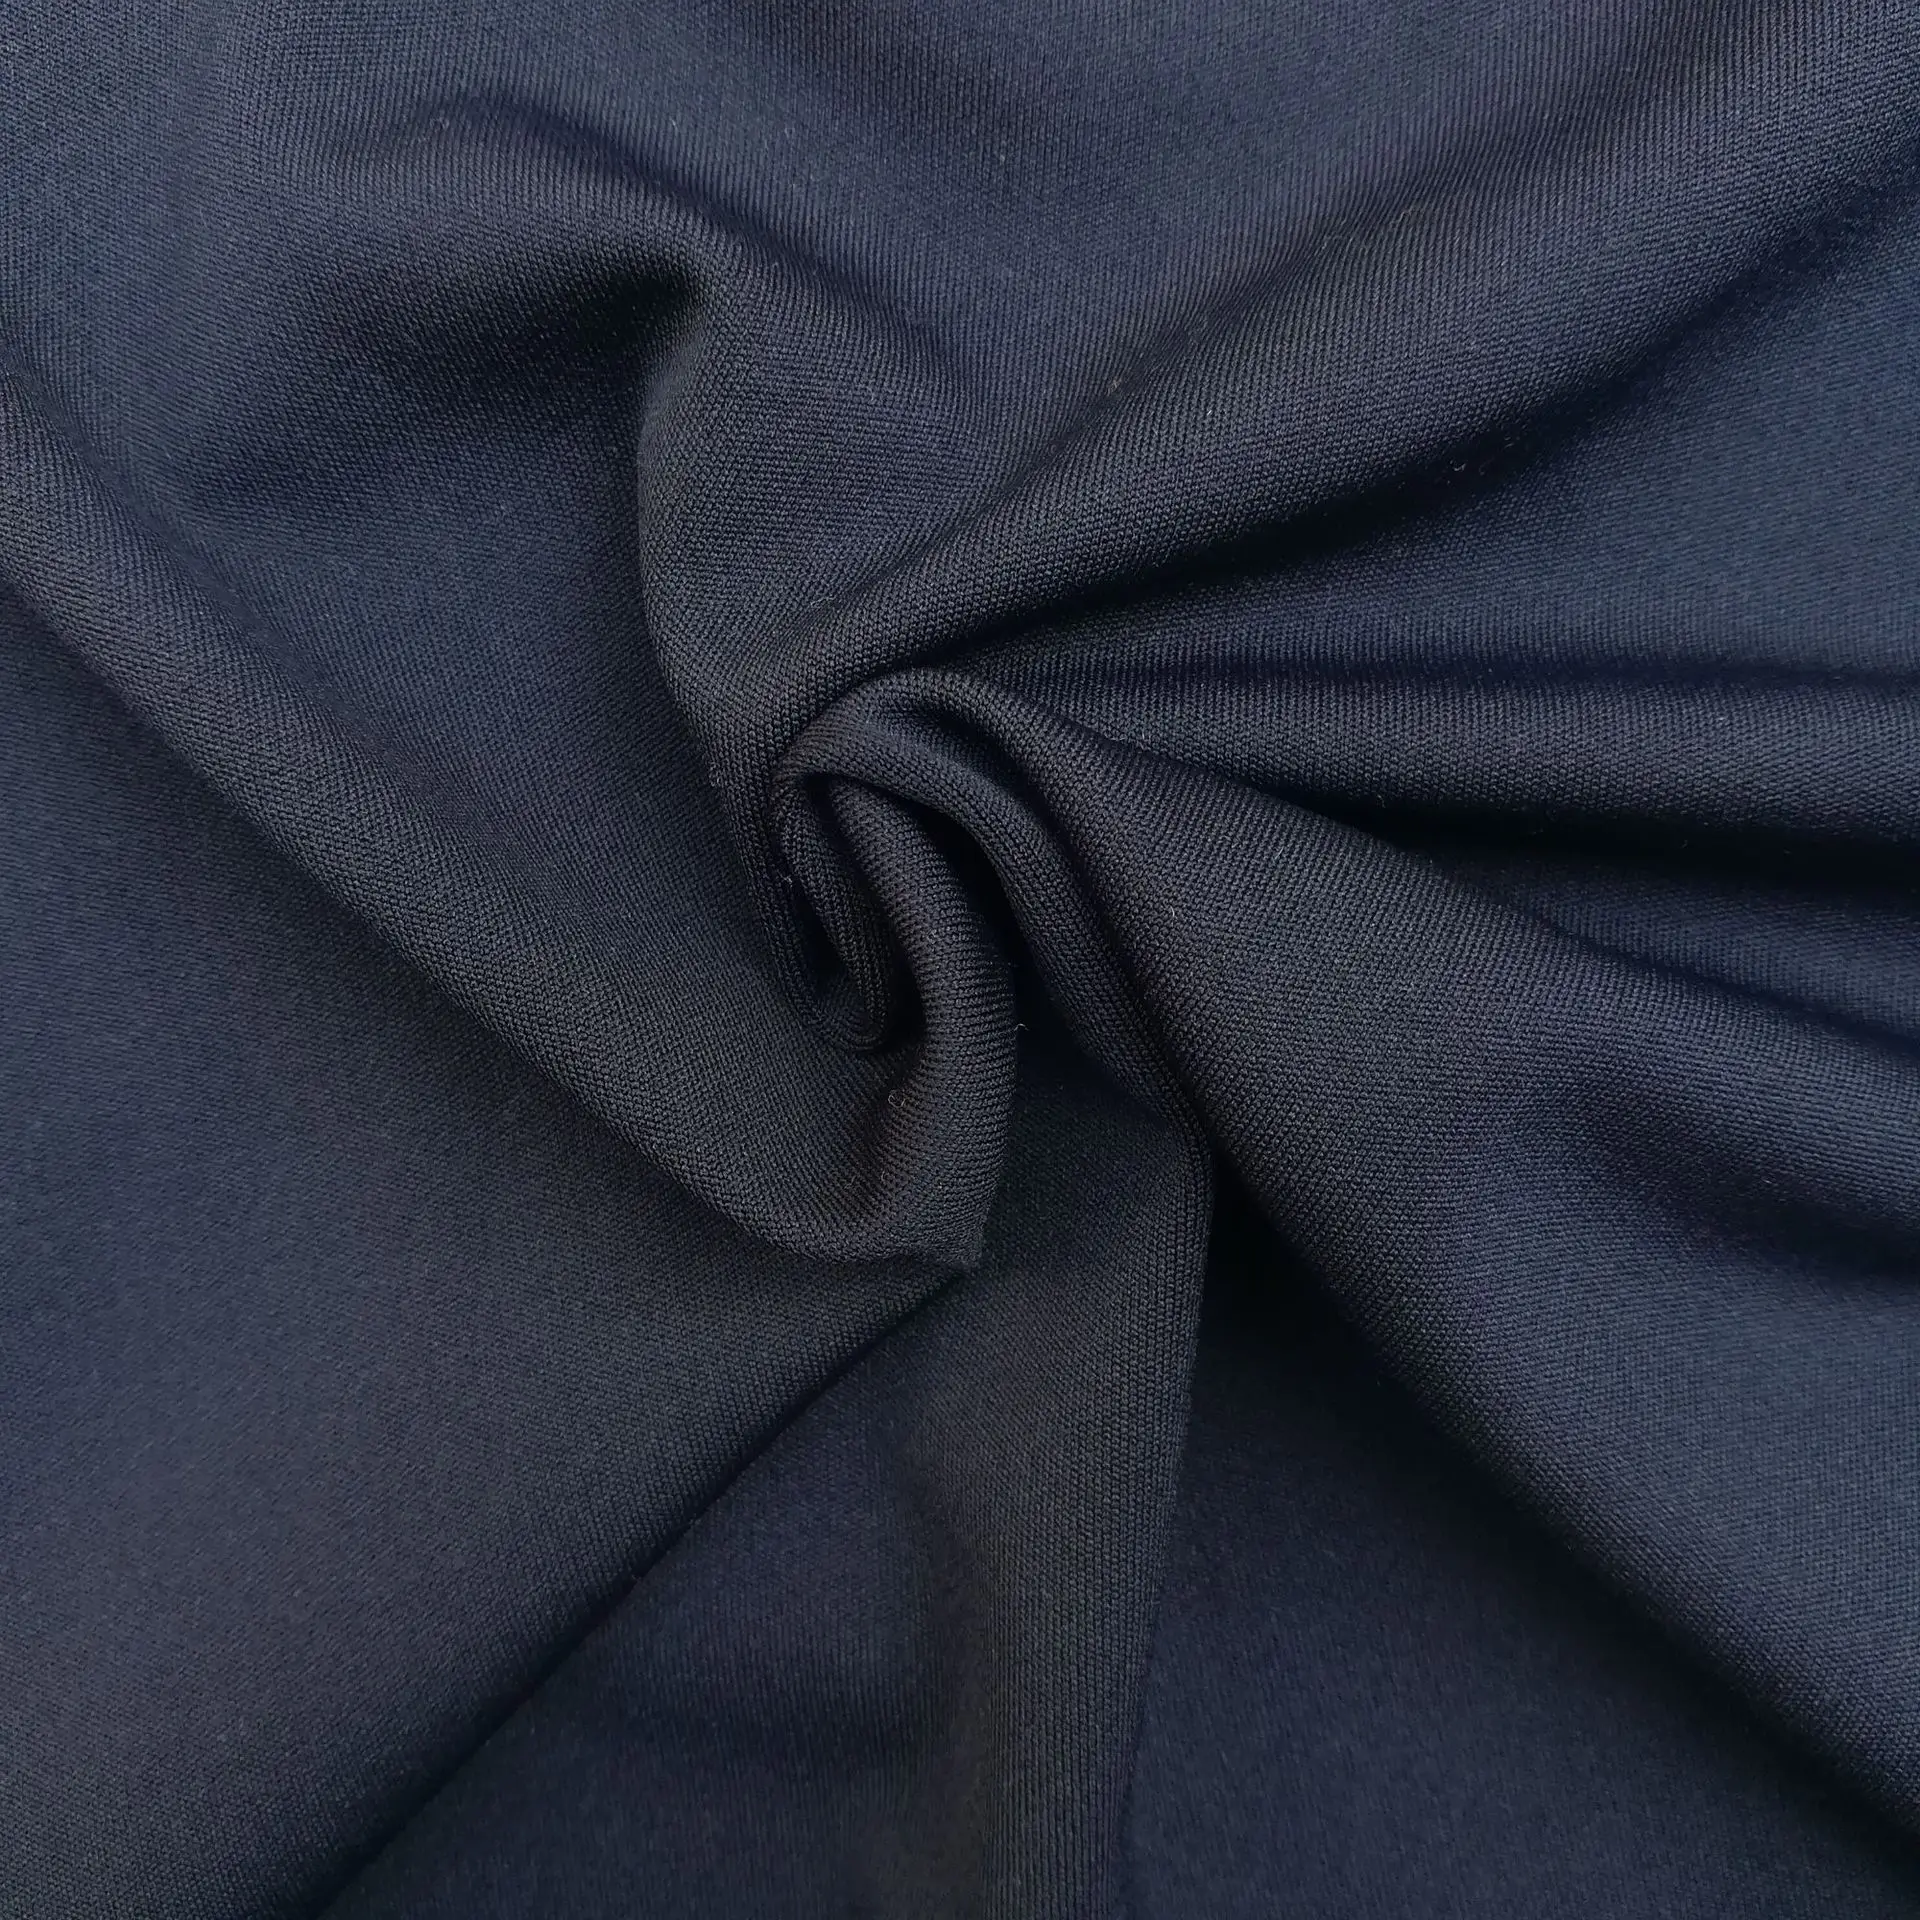 
Shaoxing Custom 92% Polyester 8% Spandex 220GSM 4 Way Knitted Zurich Fabric For Sports Wear 